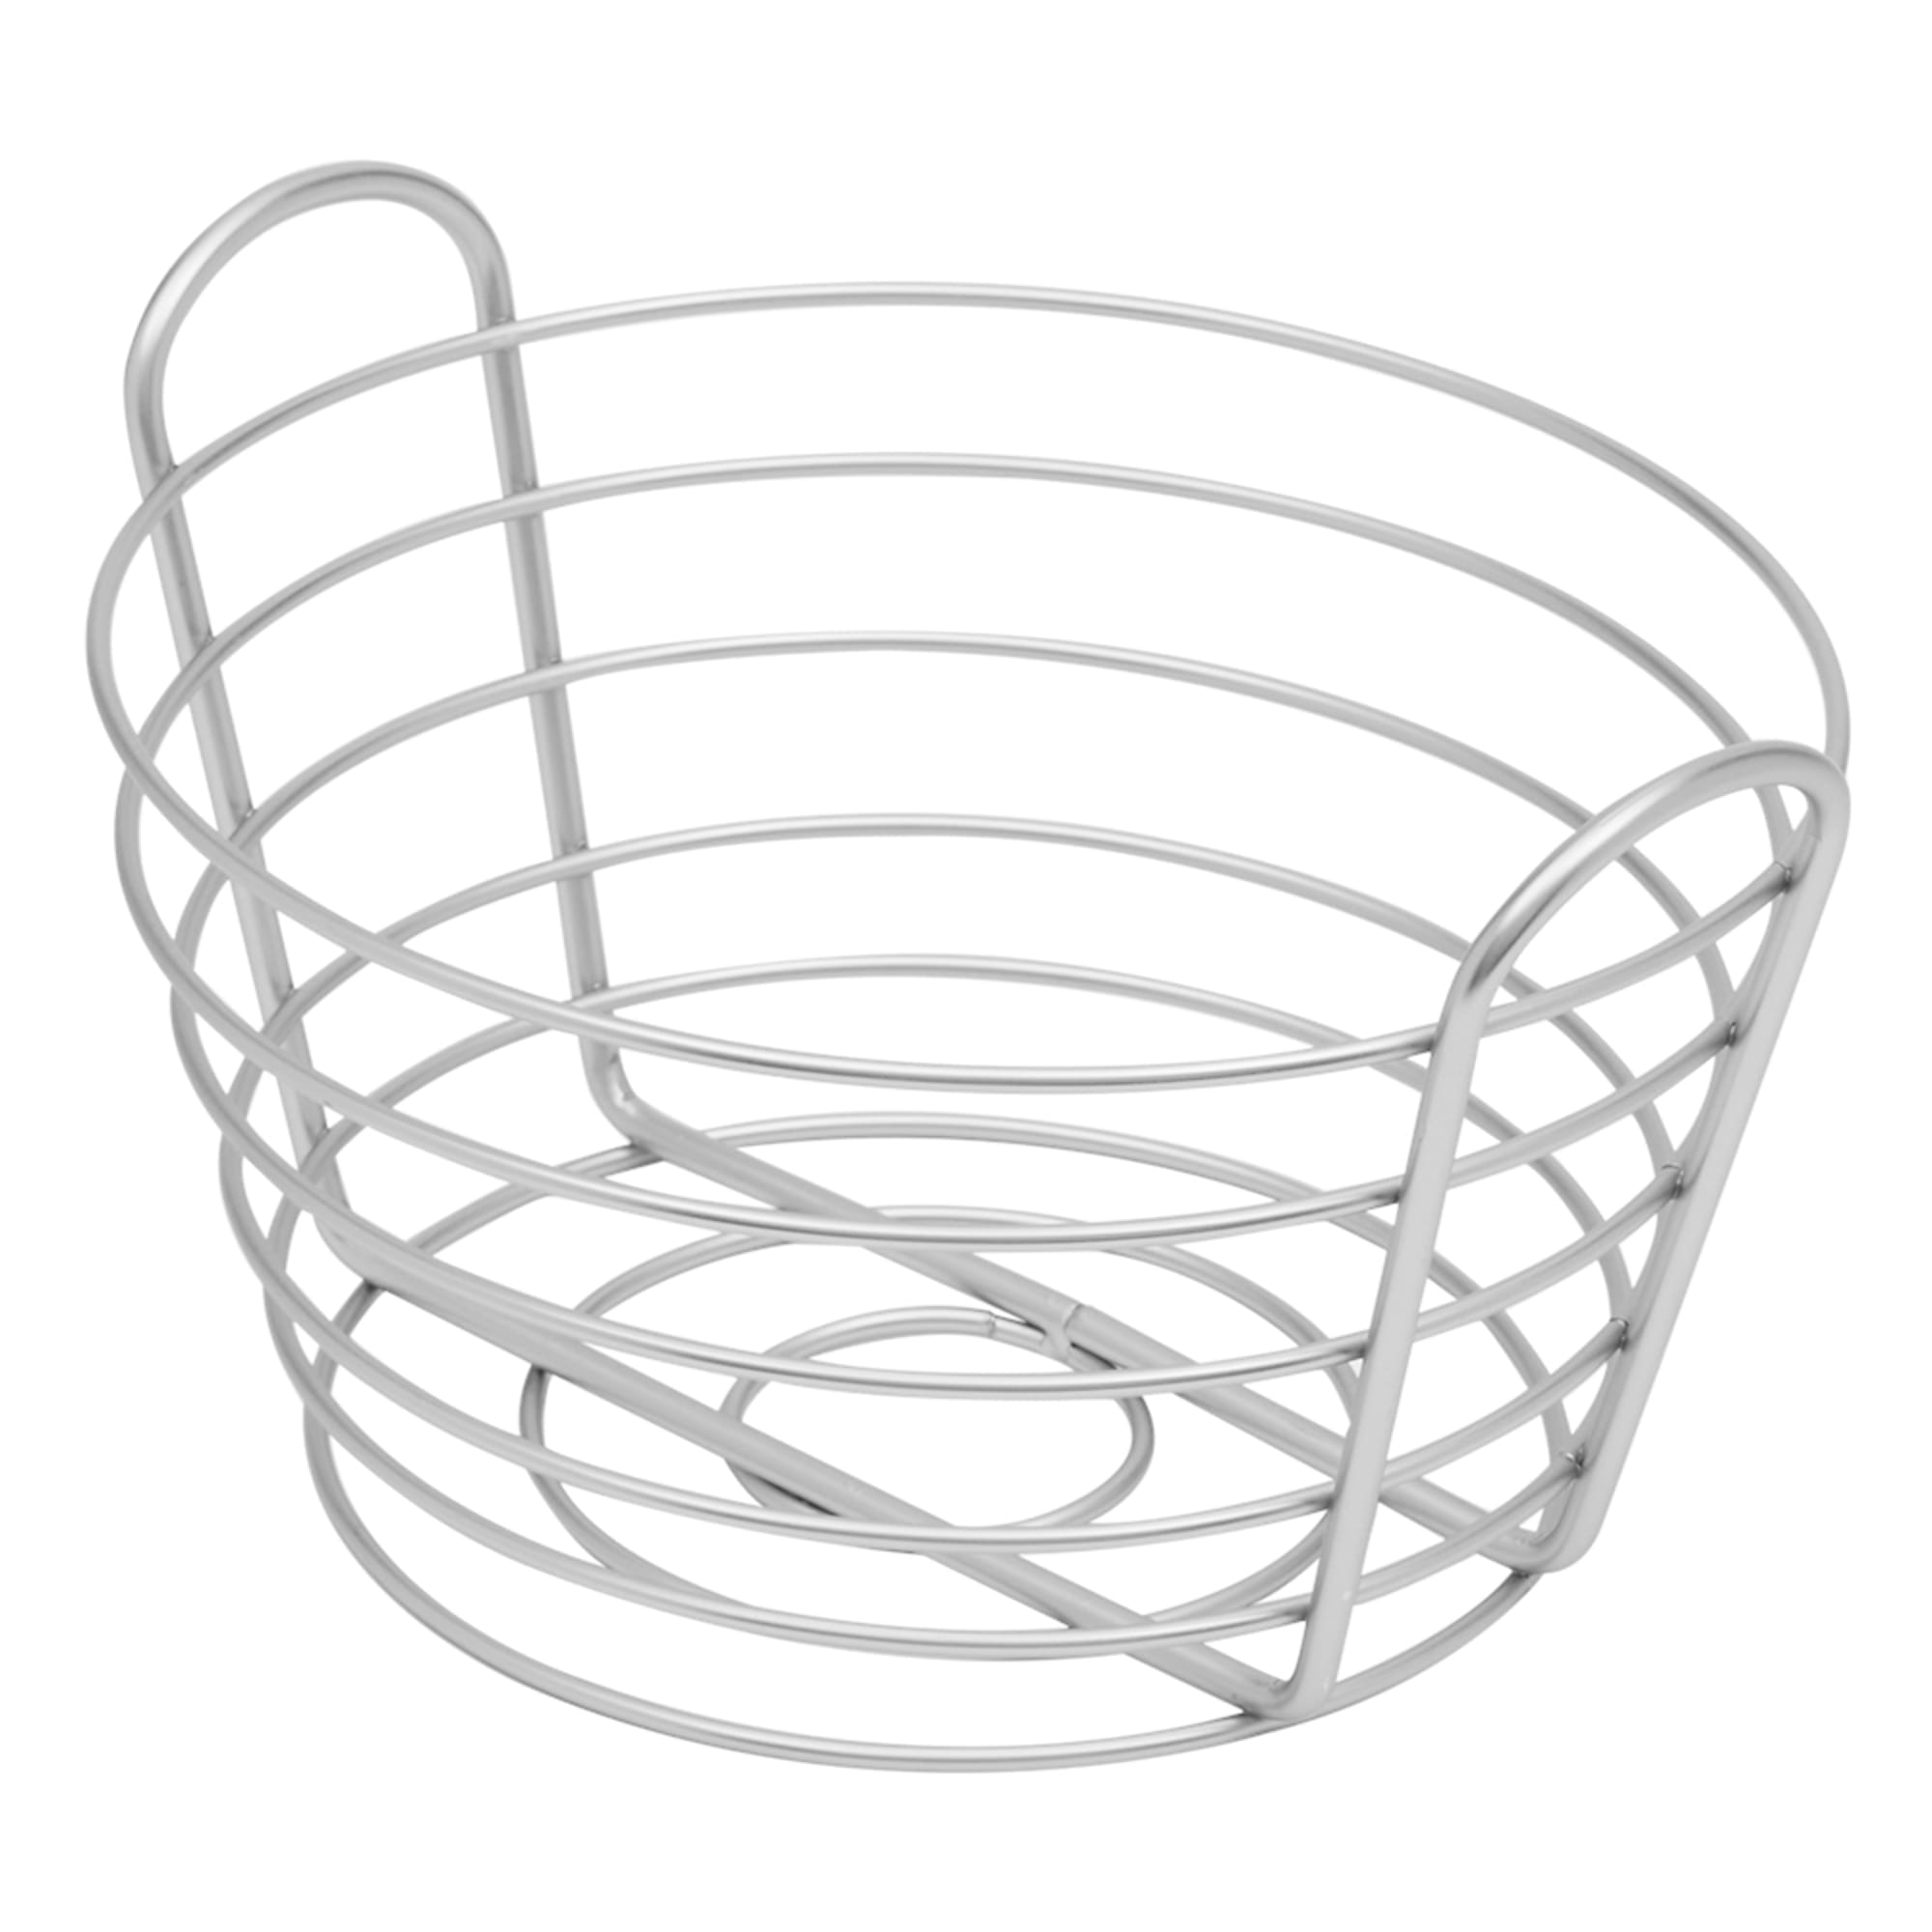 Michael Graves Design Simplicity Tapered Steel Wire Fruit Basket with Built in Easy Carrying Open Handles, Satin Nickel $10.00 EACH, CASE PACK OF 6